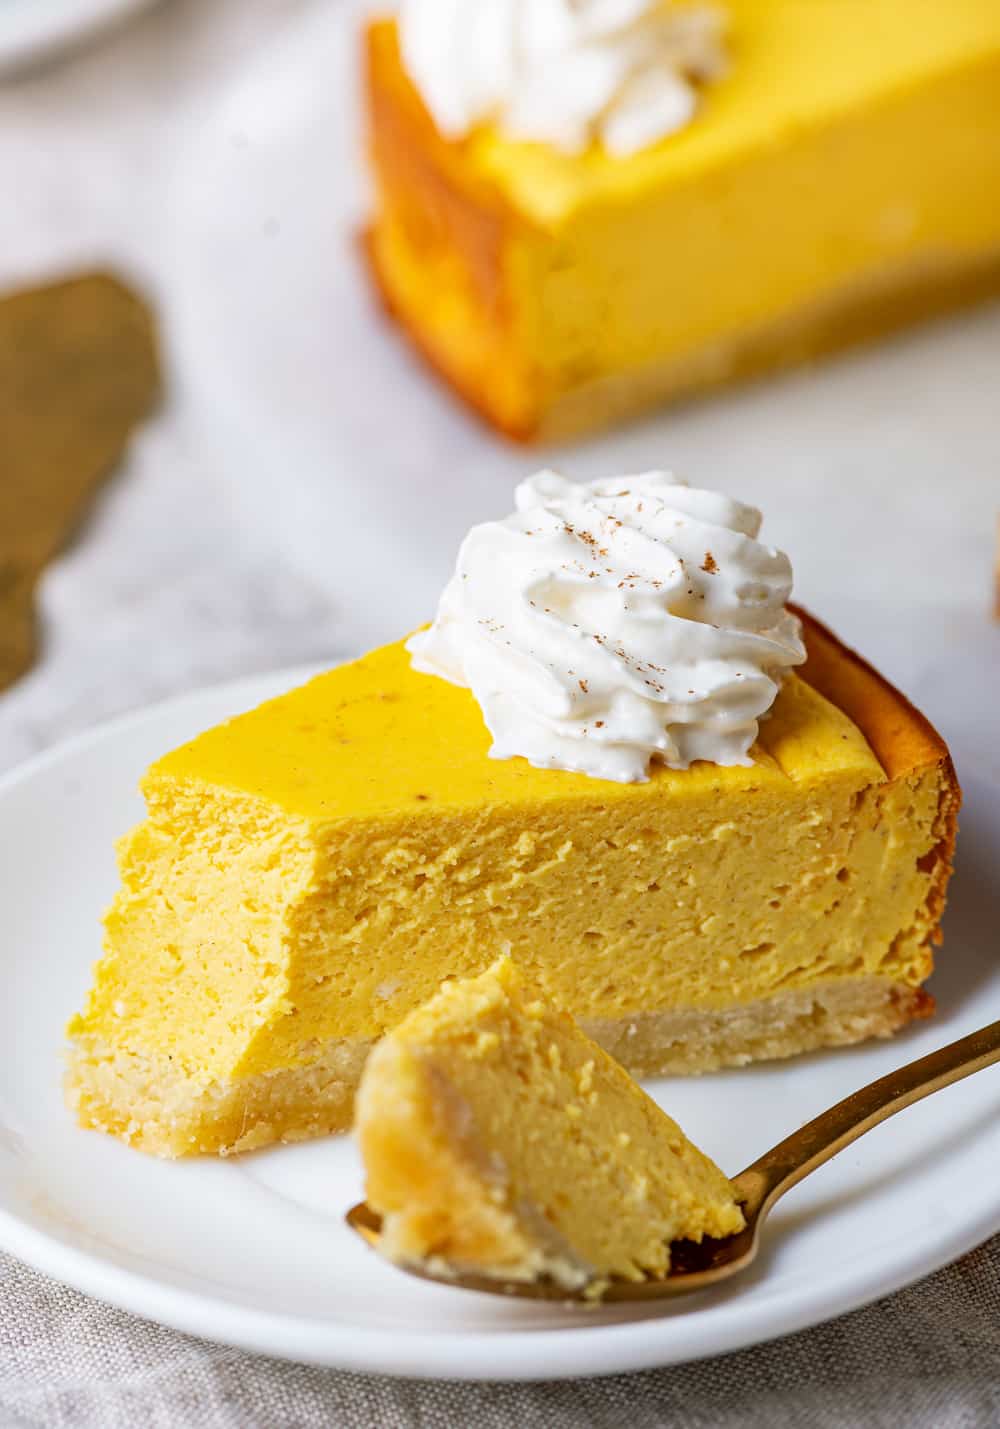 A slice of pumpkin cheesecake on a plate with a spoon holding a piece of it.